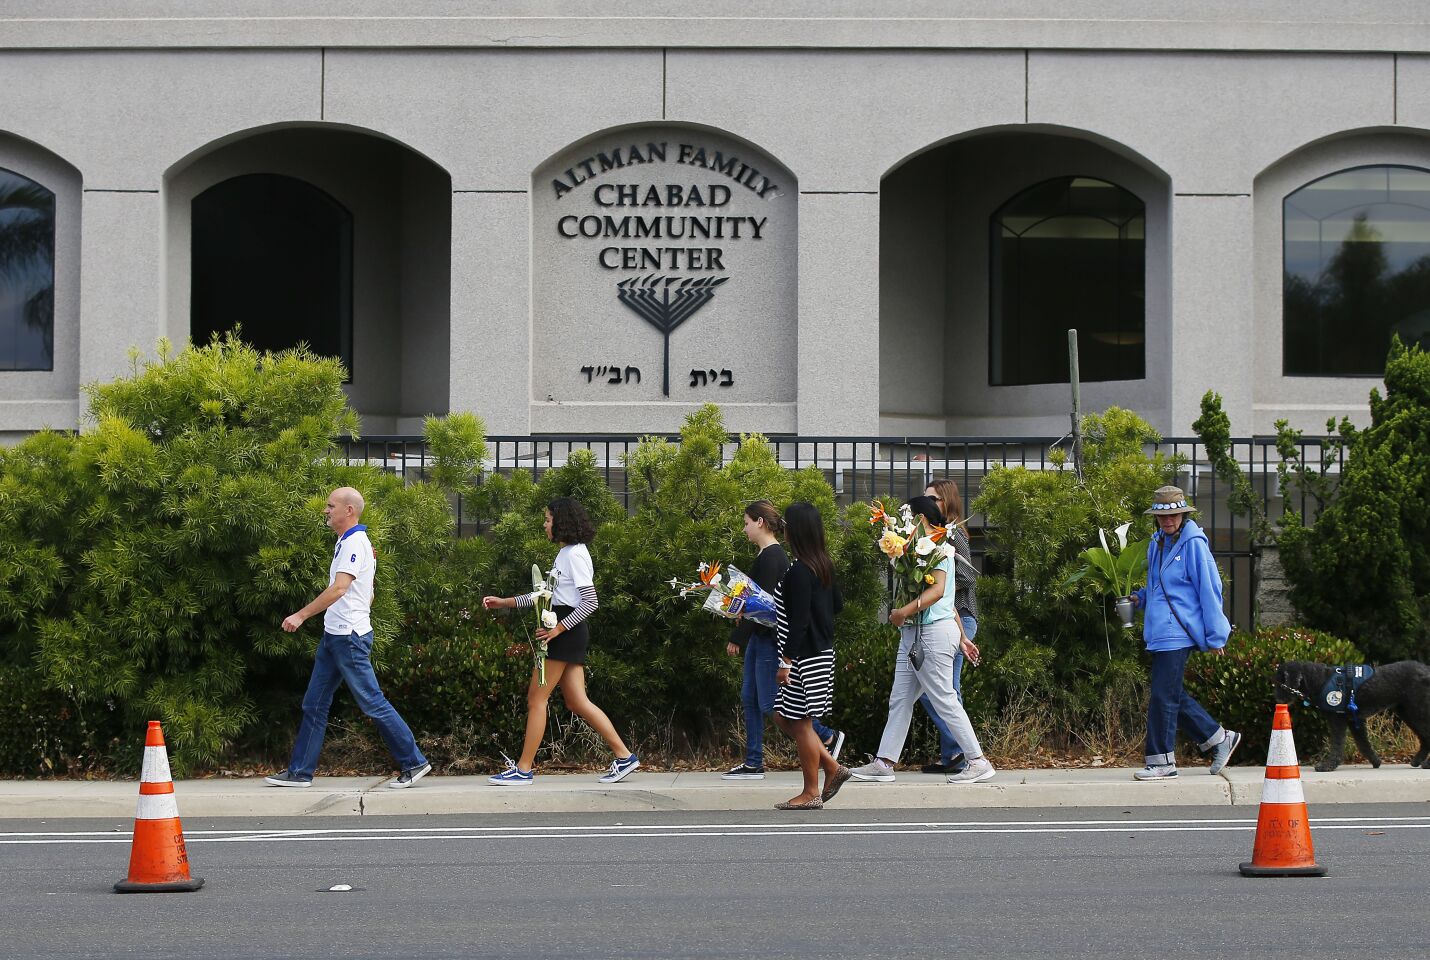 Poway residents walk to leave flowers at a memorial near the Chabad of Poway, where a deadly shooting took place the day before on April 28, 2019 in Poway, California. (Photo by K.C. Alfred/The San Diego Union-Tribune)